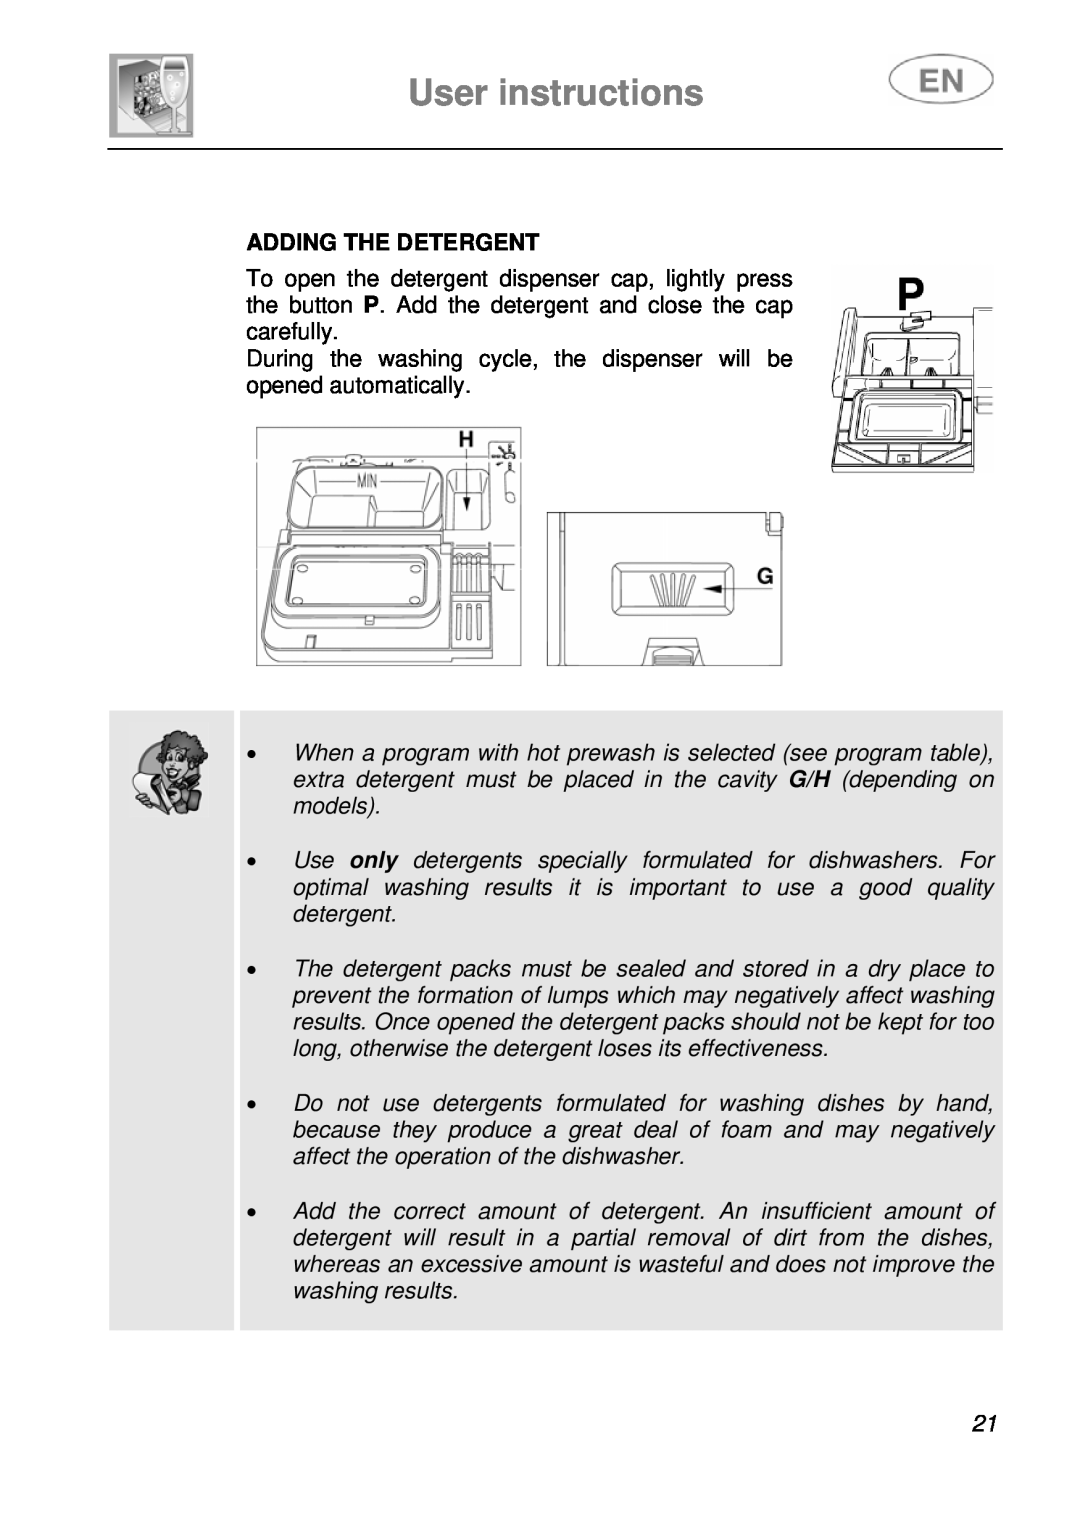 Smeg LSA14X7 User instructions, Adding The Detergent, During the washing cycle, the dispenser will be opened automatically 